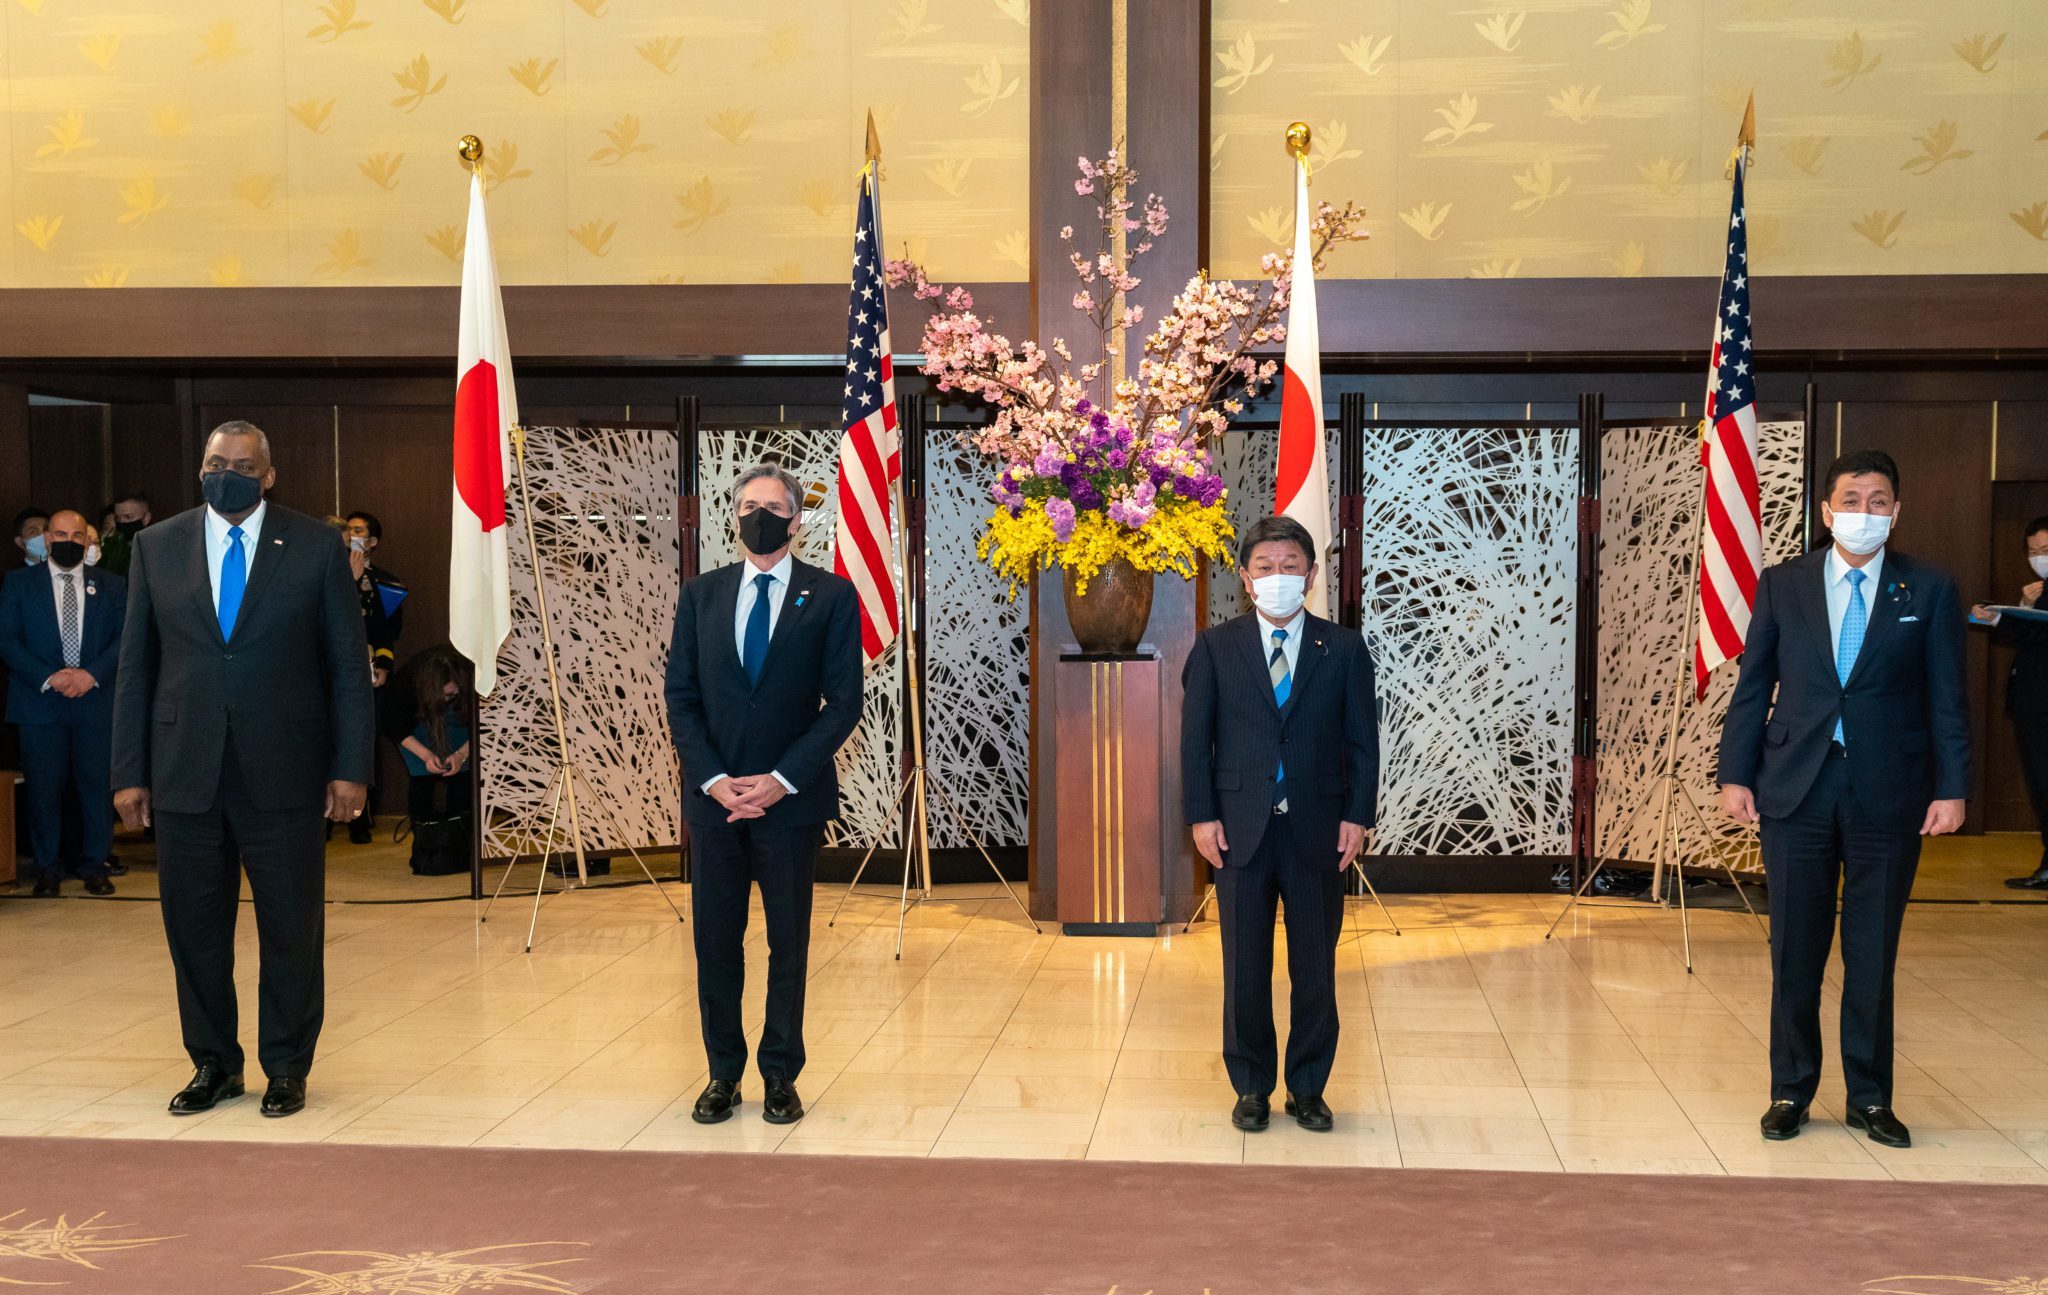 Secretary_Blinken_and_Secretary_Austin_Participate_in_a_2+2_Meeting_with_Japanese_Foreign_Minister_Motegi_and_Japanese_Defense_Minister_Kishi_(51042217723)